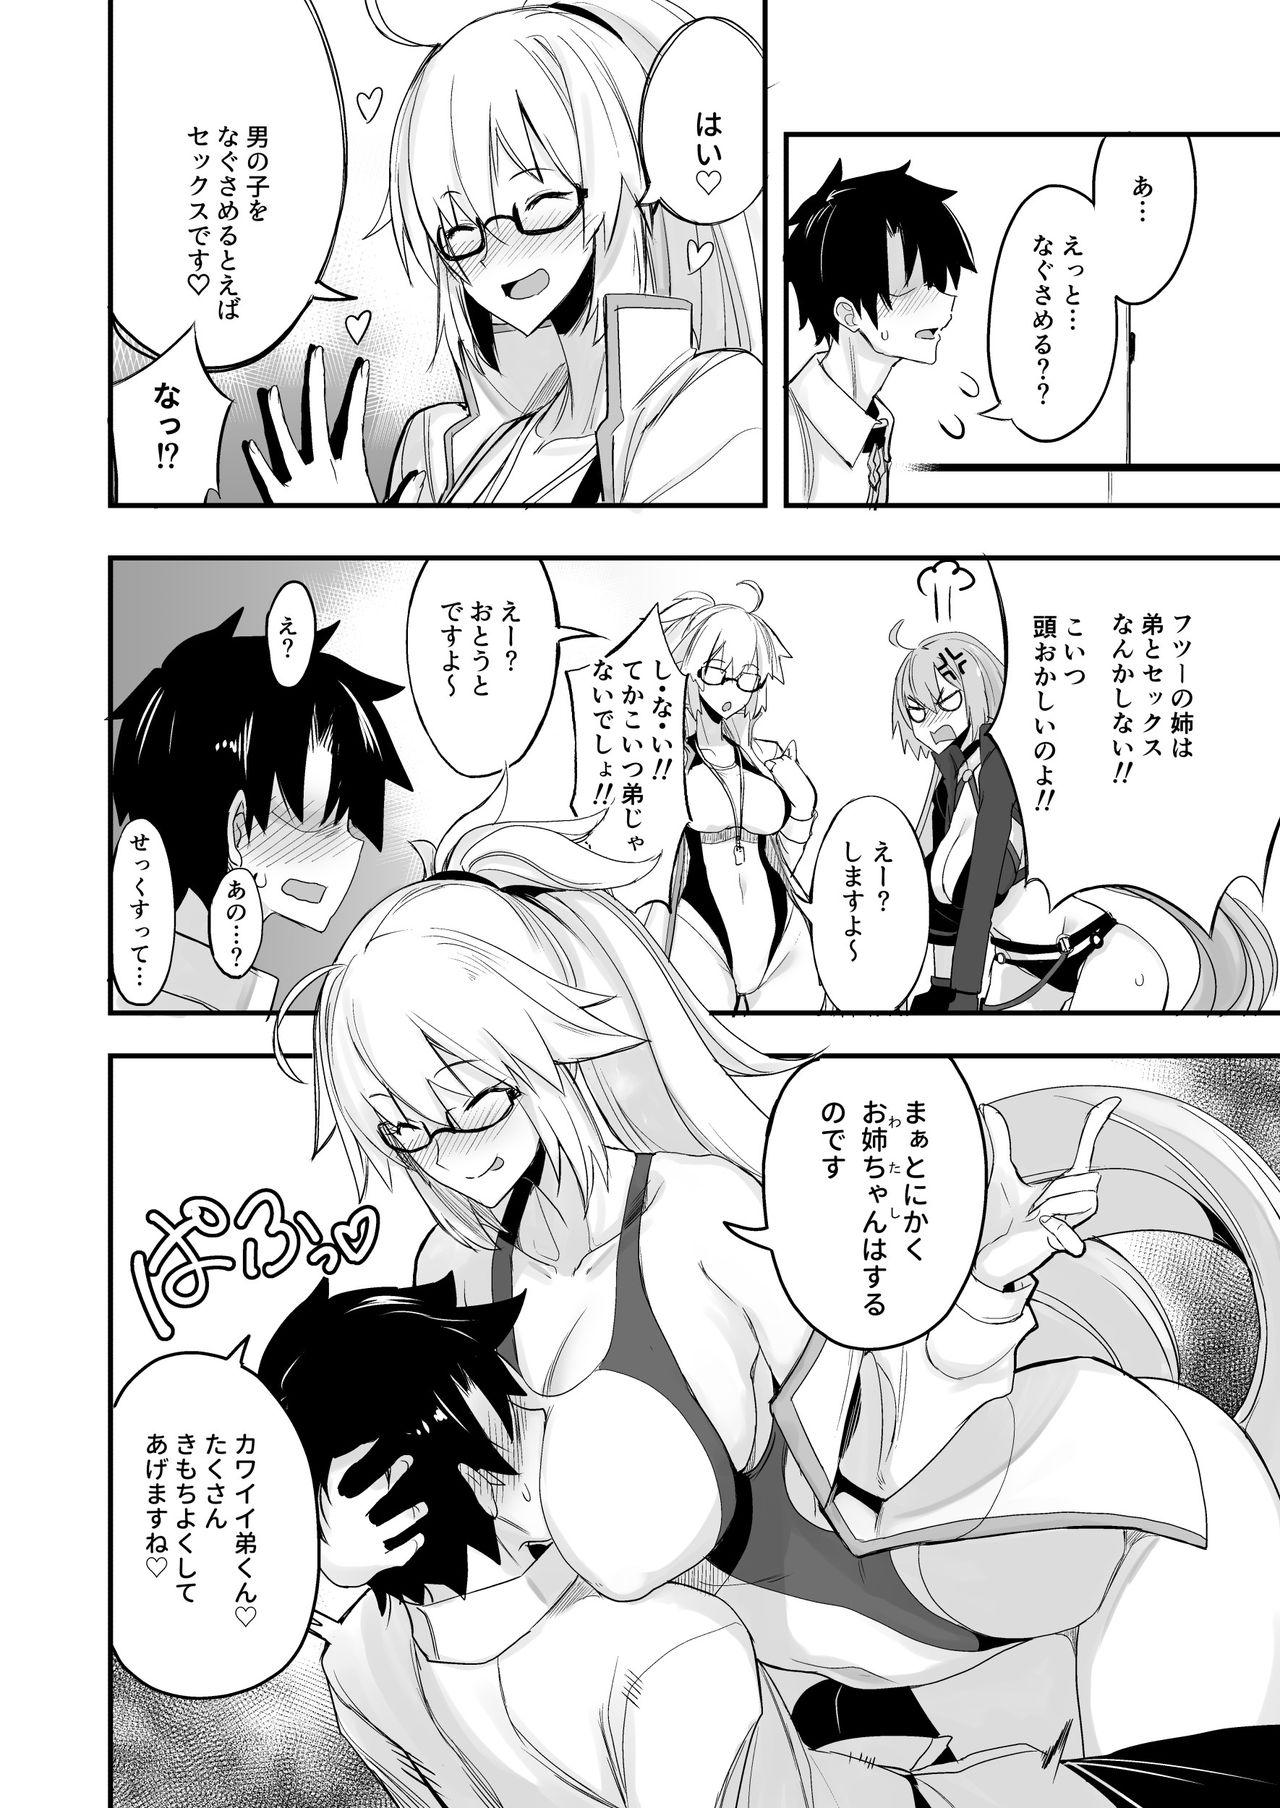 Foot W Jeanne vs Master - Fate grand order Shecock - Page 3